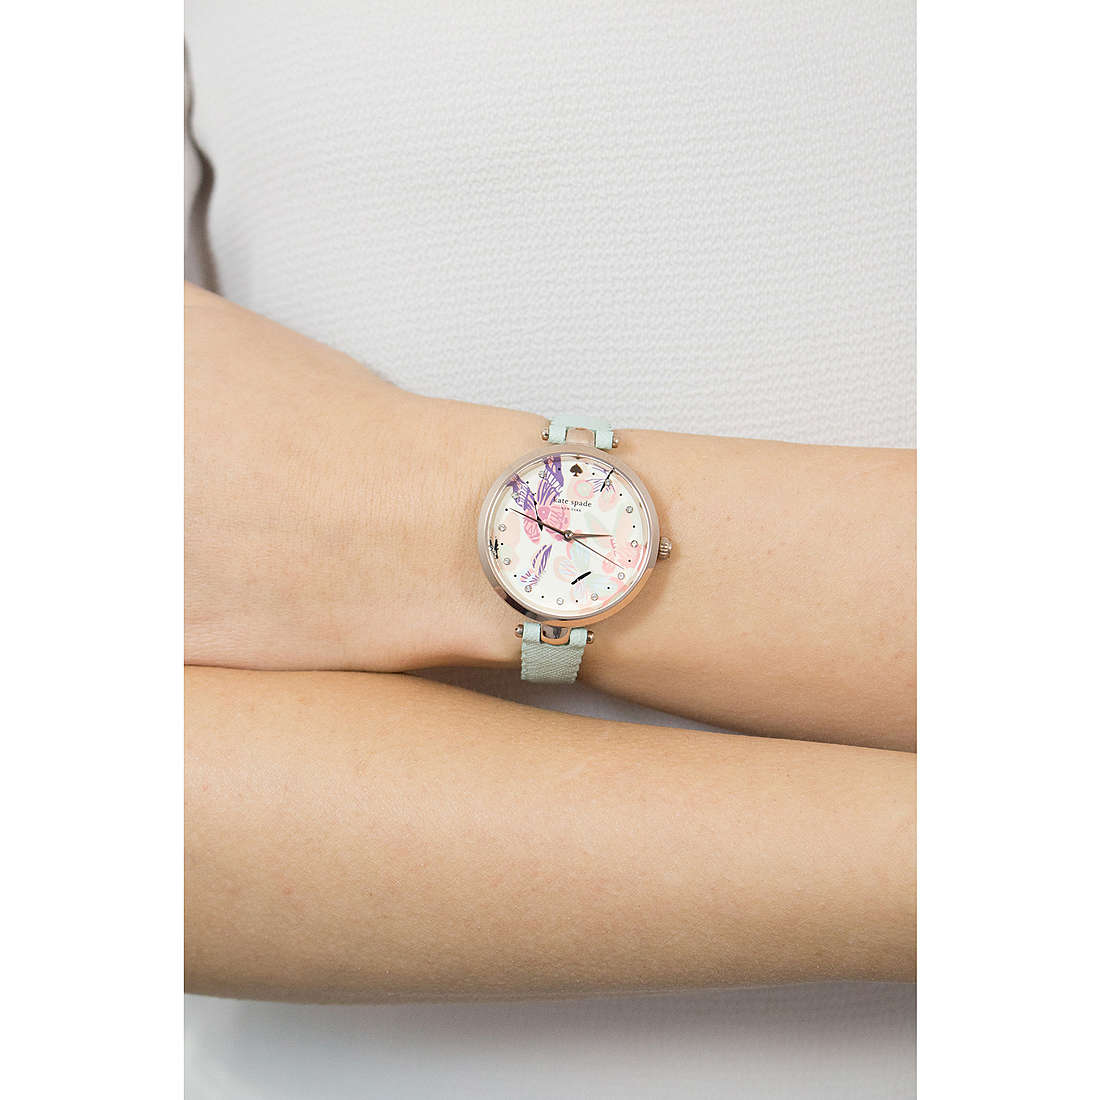 Kate Spade New York only time Holland woman KSW1414 wearing